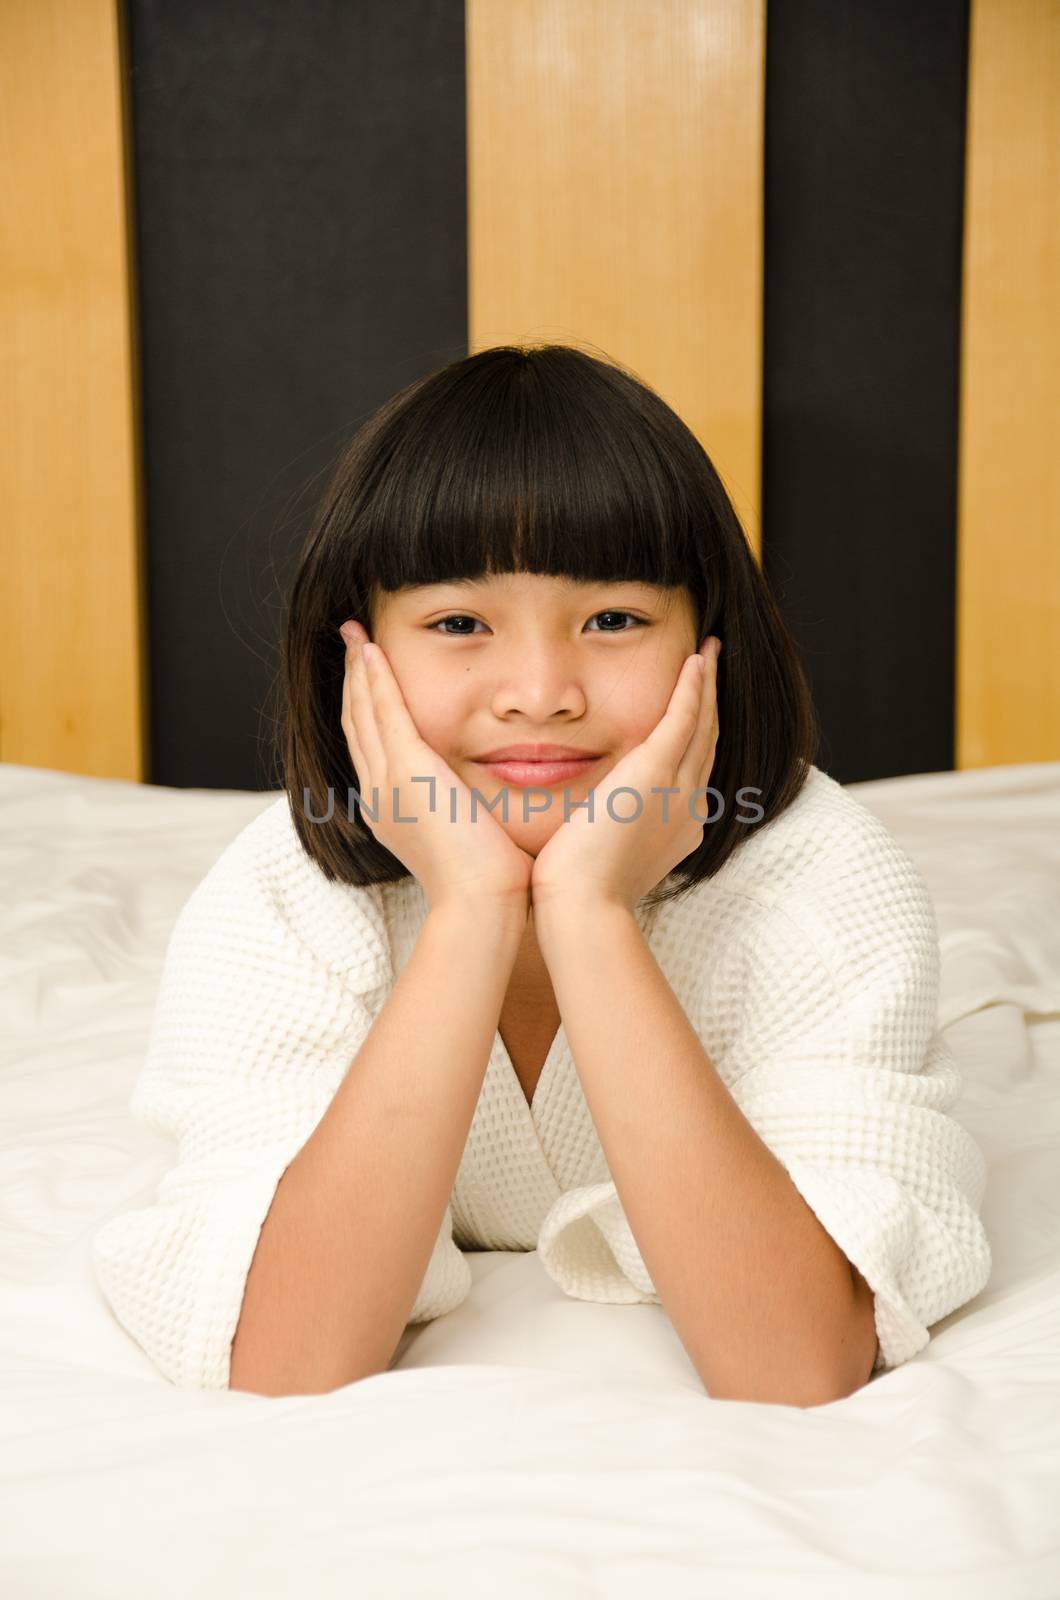 Adorable girl waked up. by chatchai